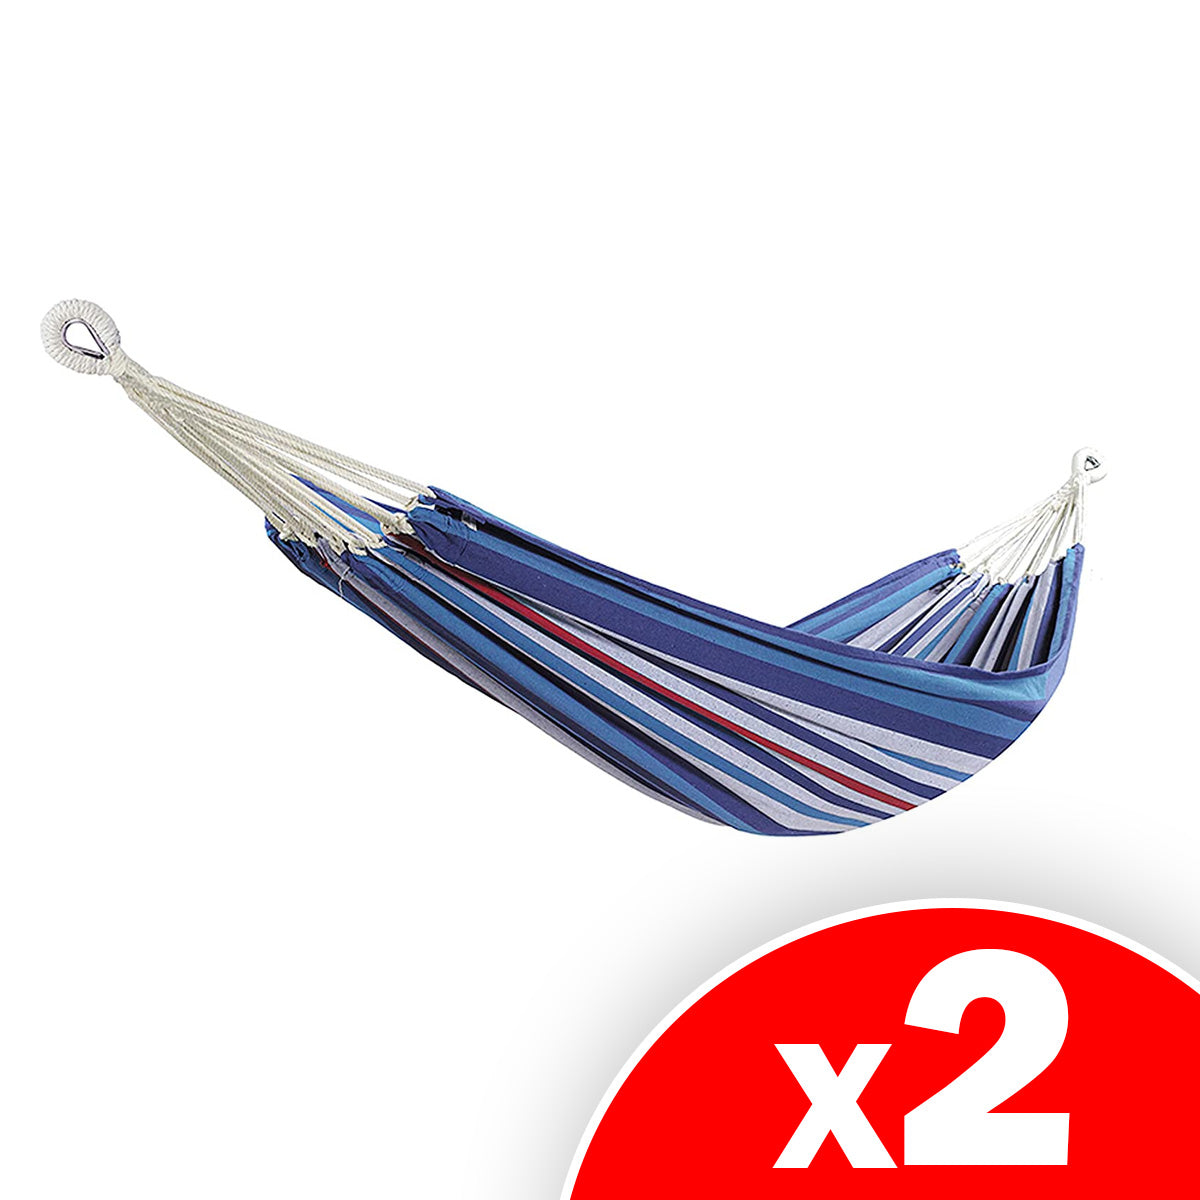 Bliss Hammocks 40" Wide Hammock with Hanging Hardware, Assorted Colors, 2 Pack